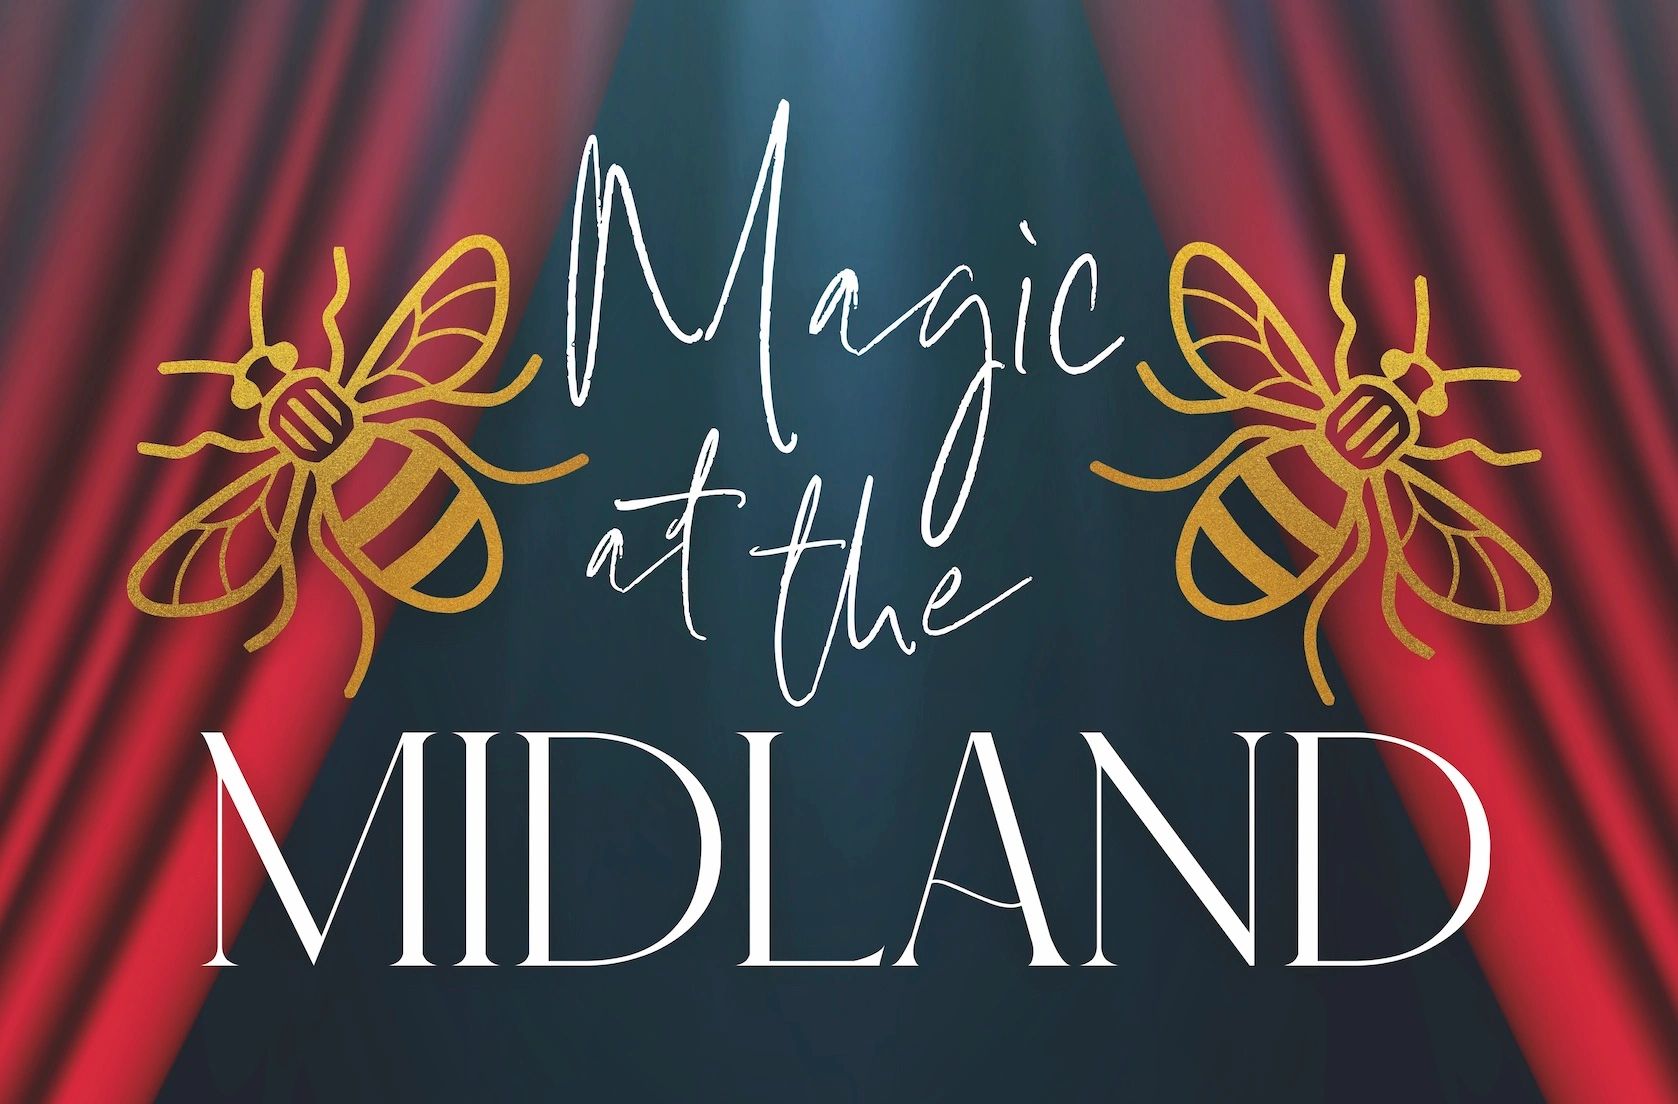 The Magic at the Midland logo featuring Manchester's iconic worker bees.